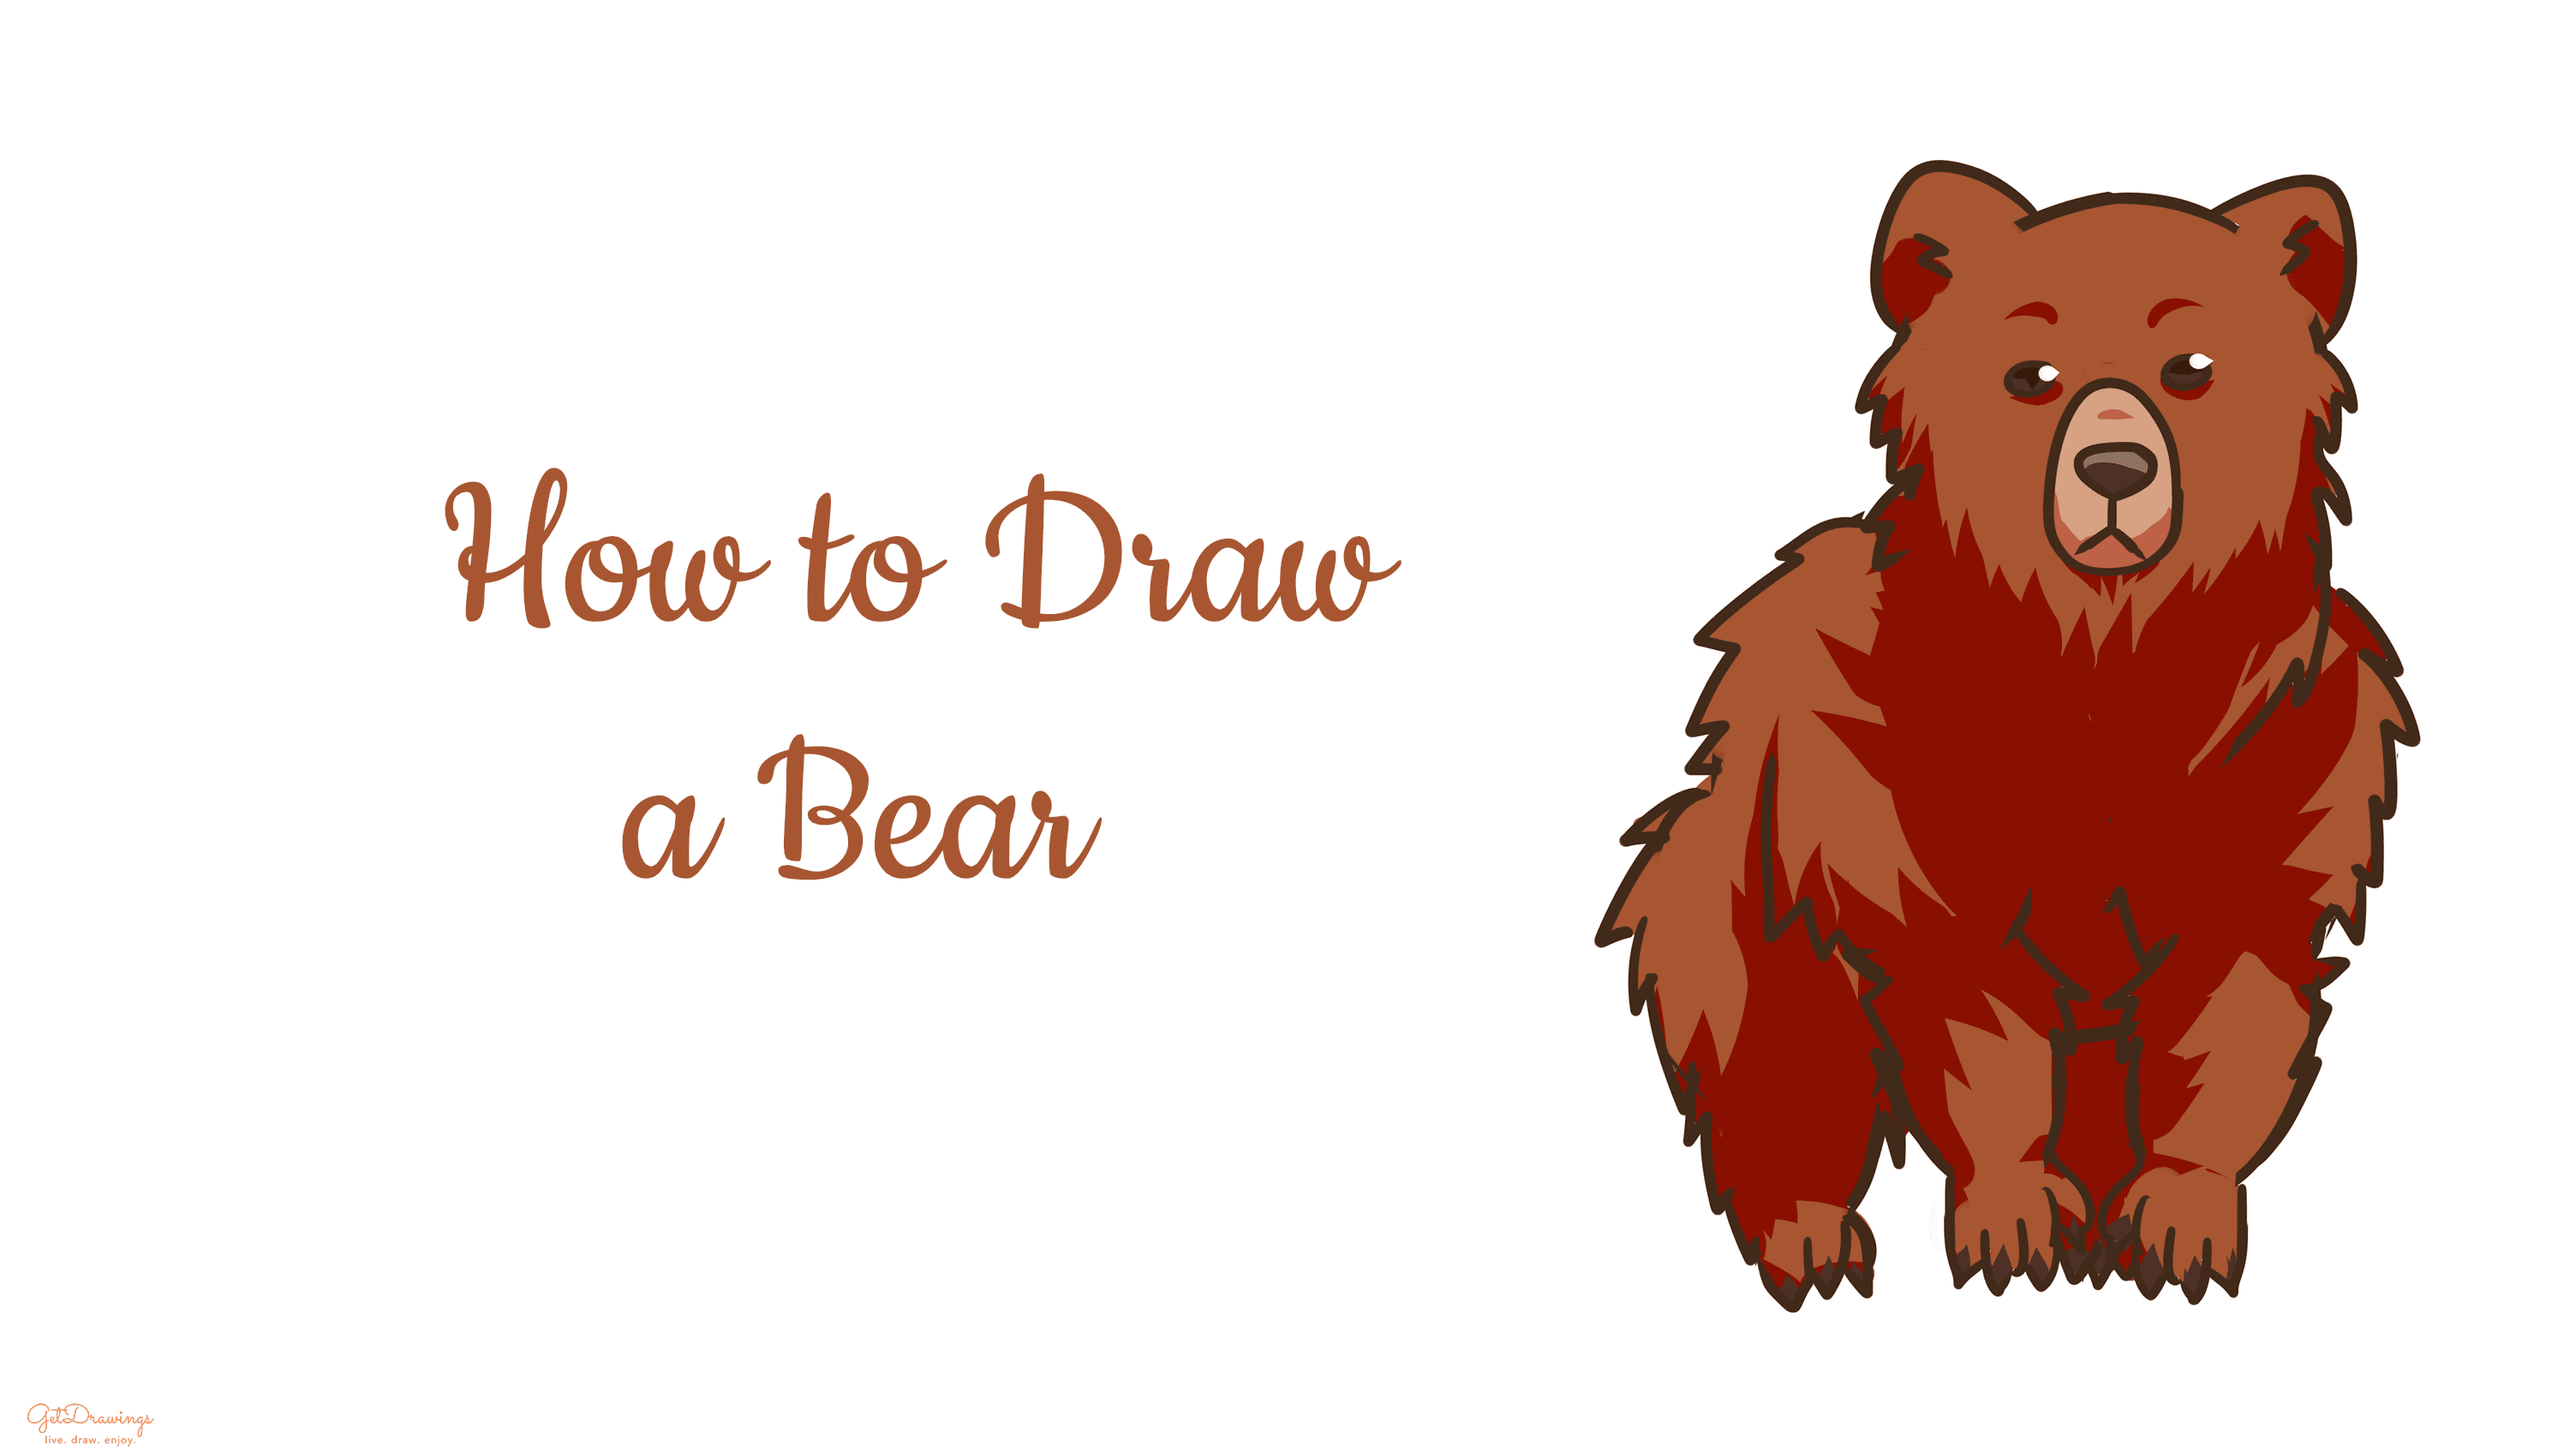 How to draw a Bear step by step